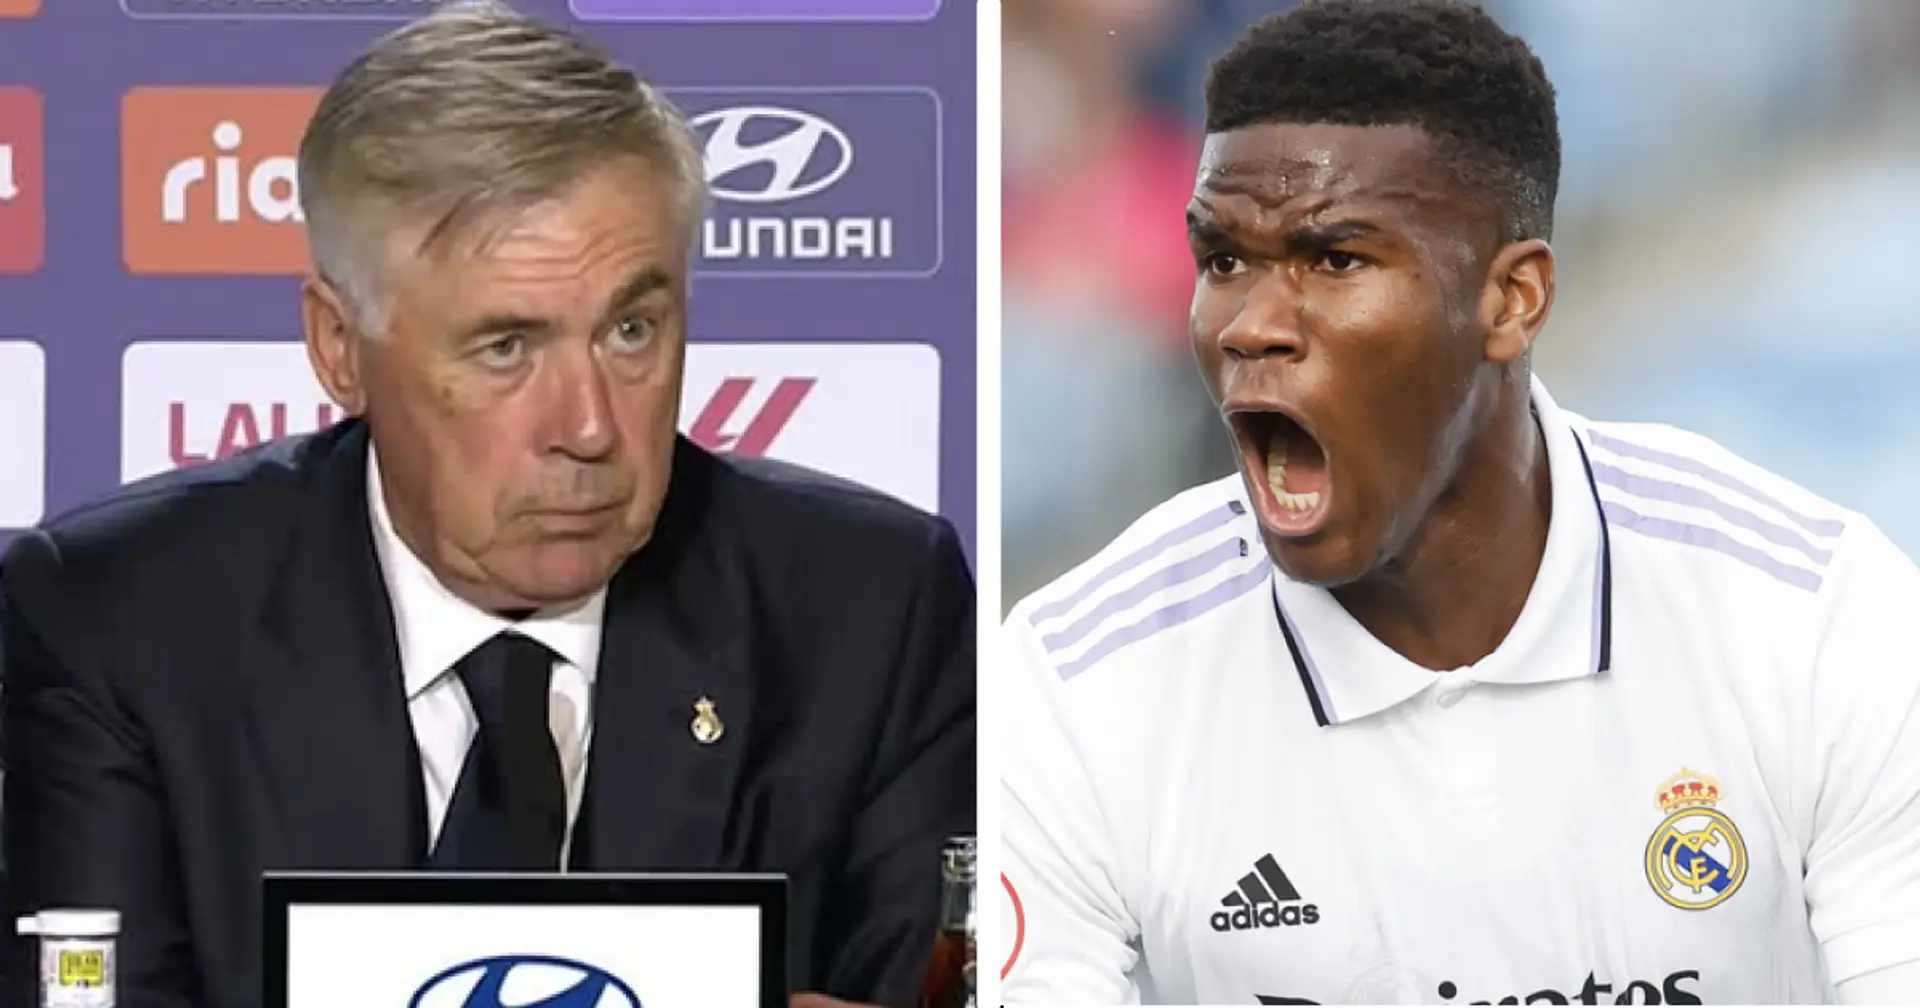 'They are very good': Ancelotti names 2 players who could replace Alaba apart from Rudiger and Nacho